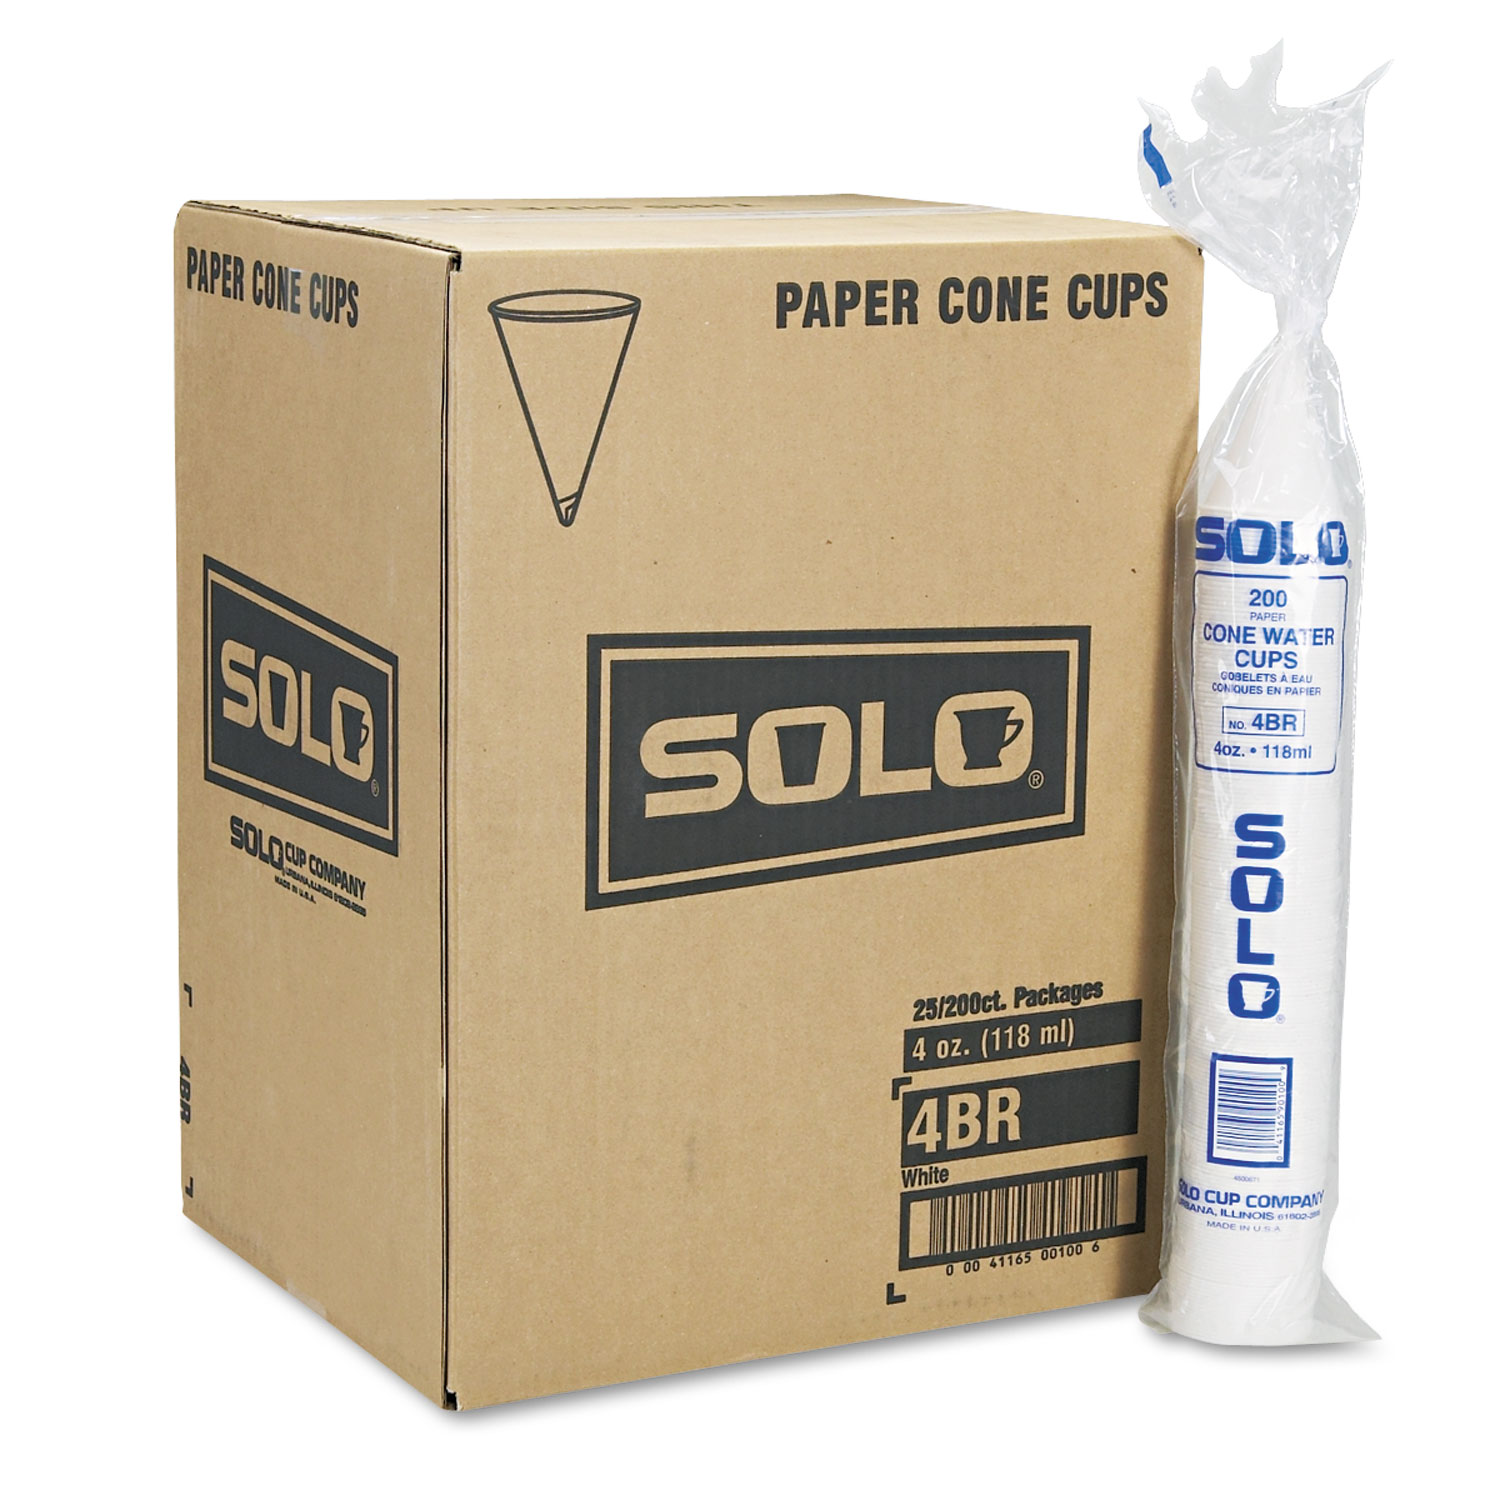 Cone Water Cups, Cold, Paper, 4oz, White, 200/Bag, 25 Bags/Carton